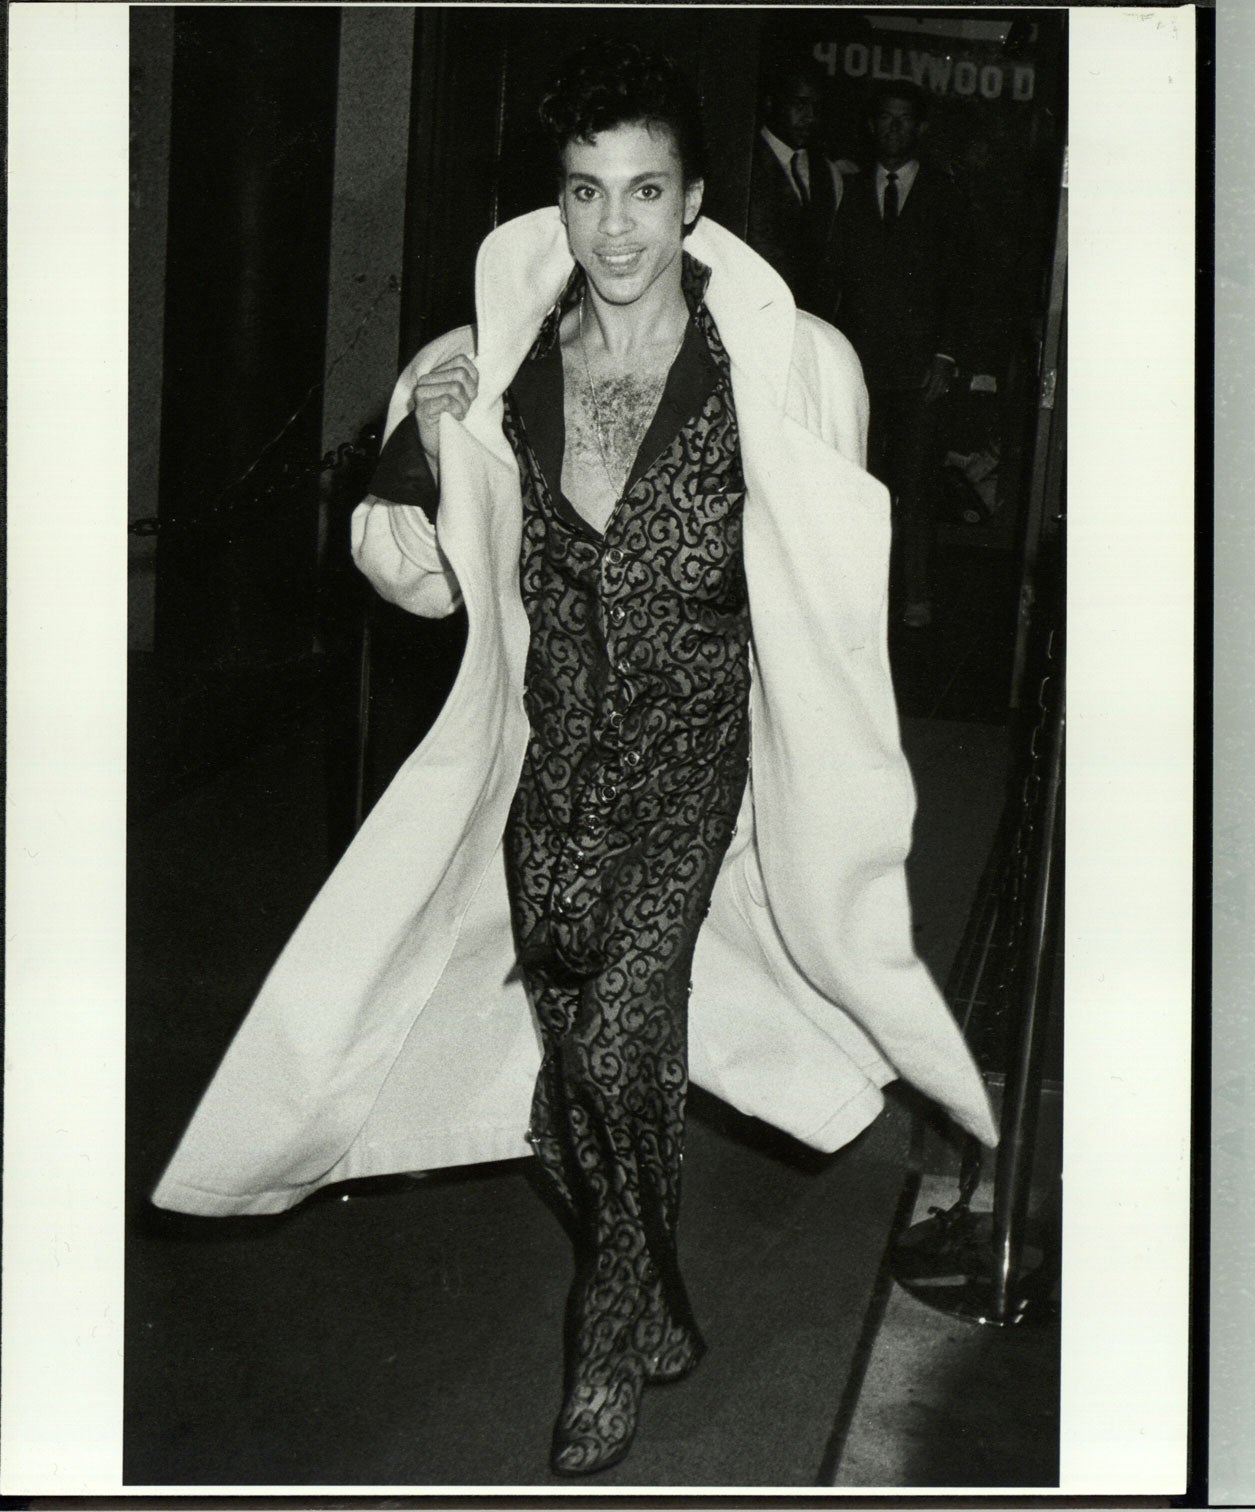 Remembering Prince's Reign as a True Fashion Icon